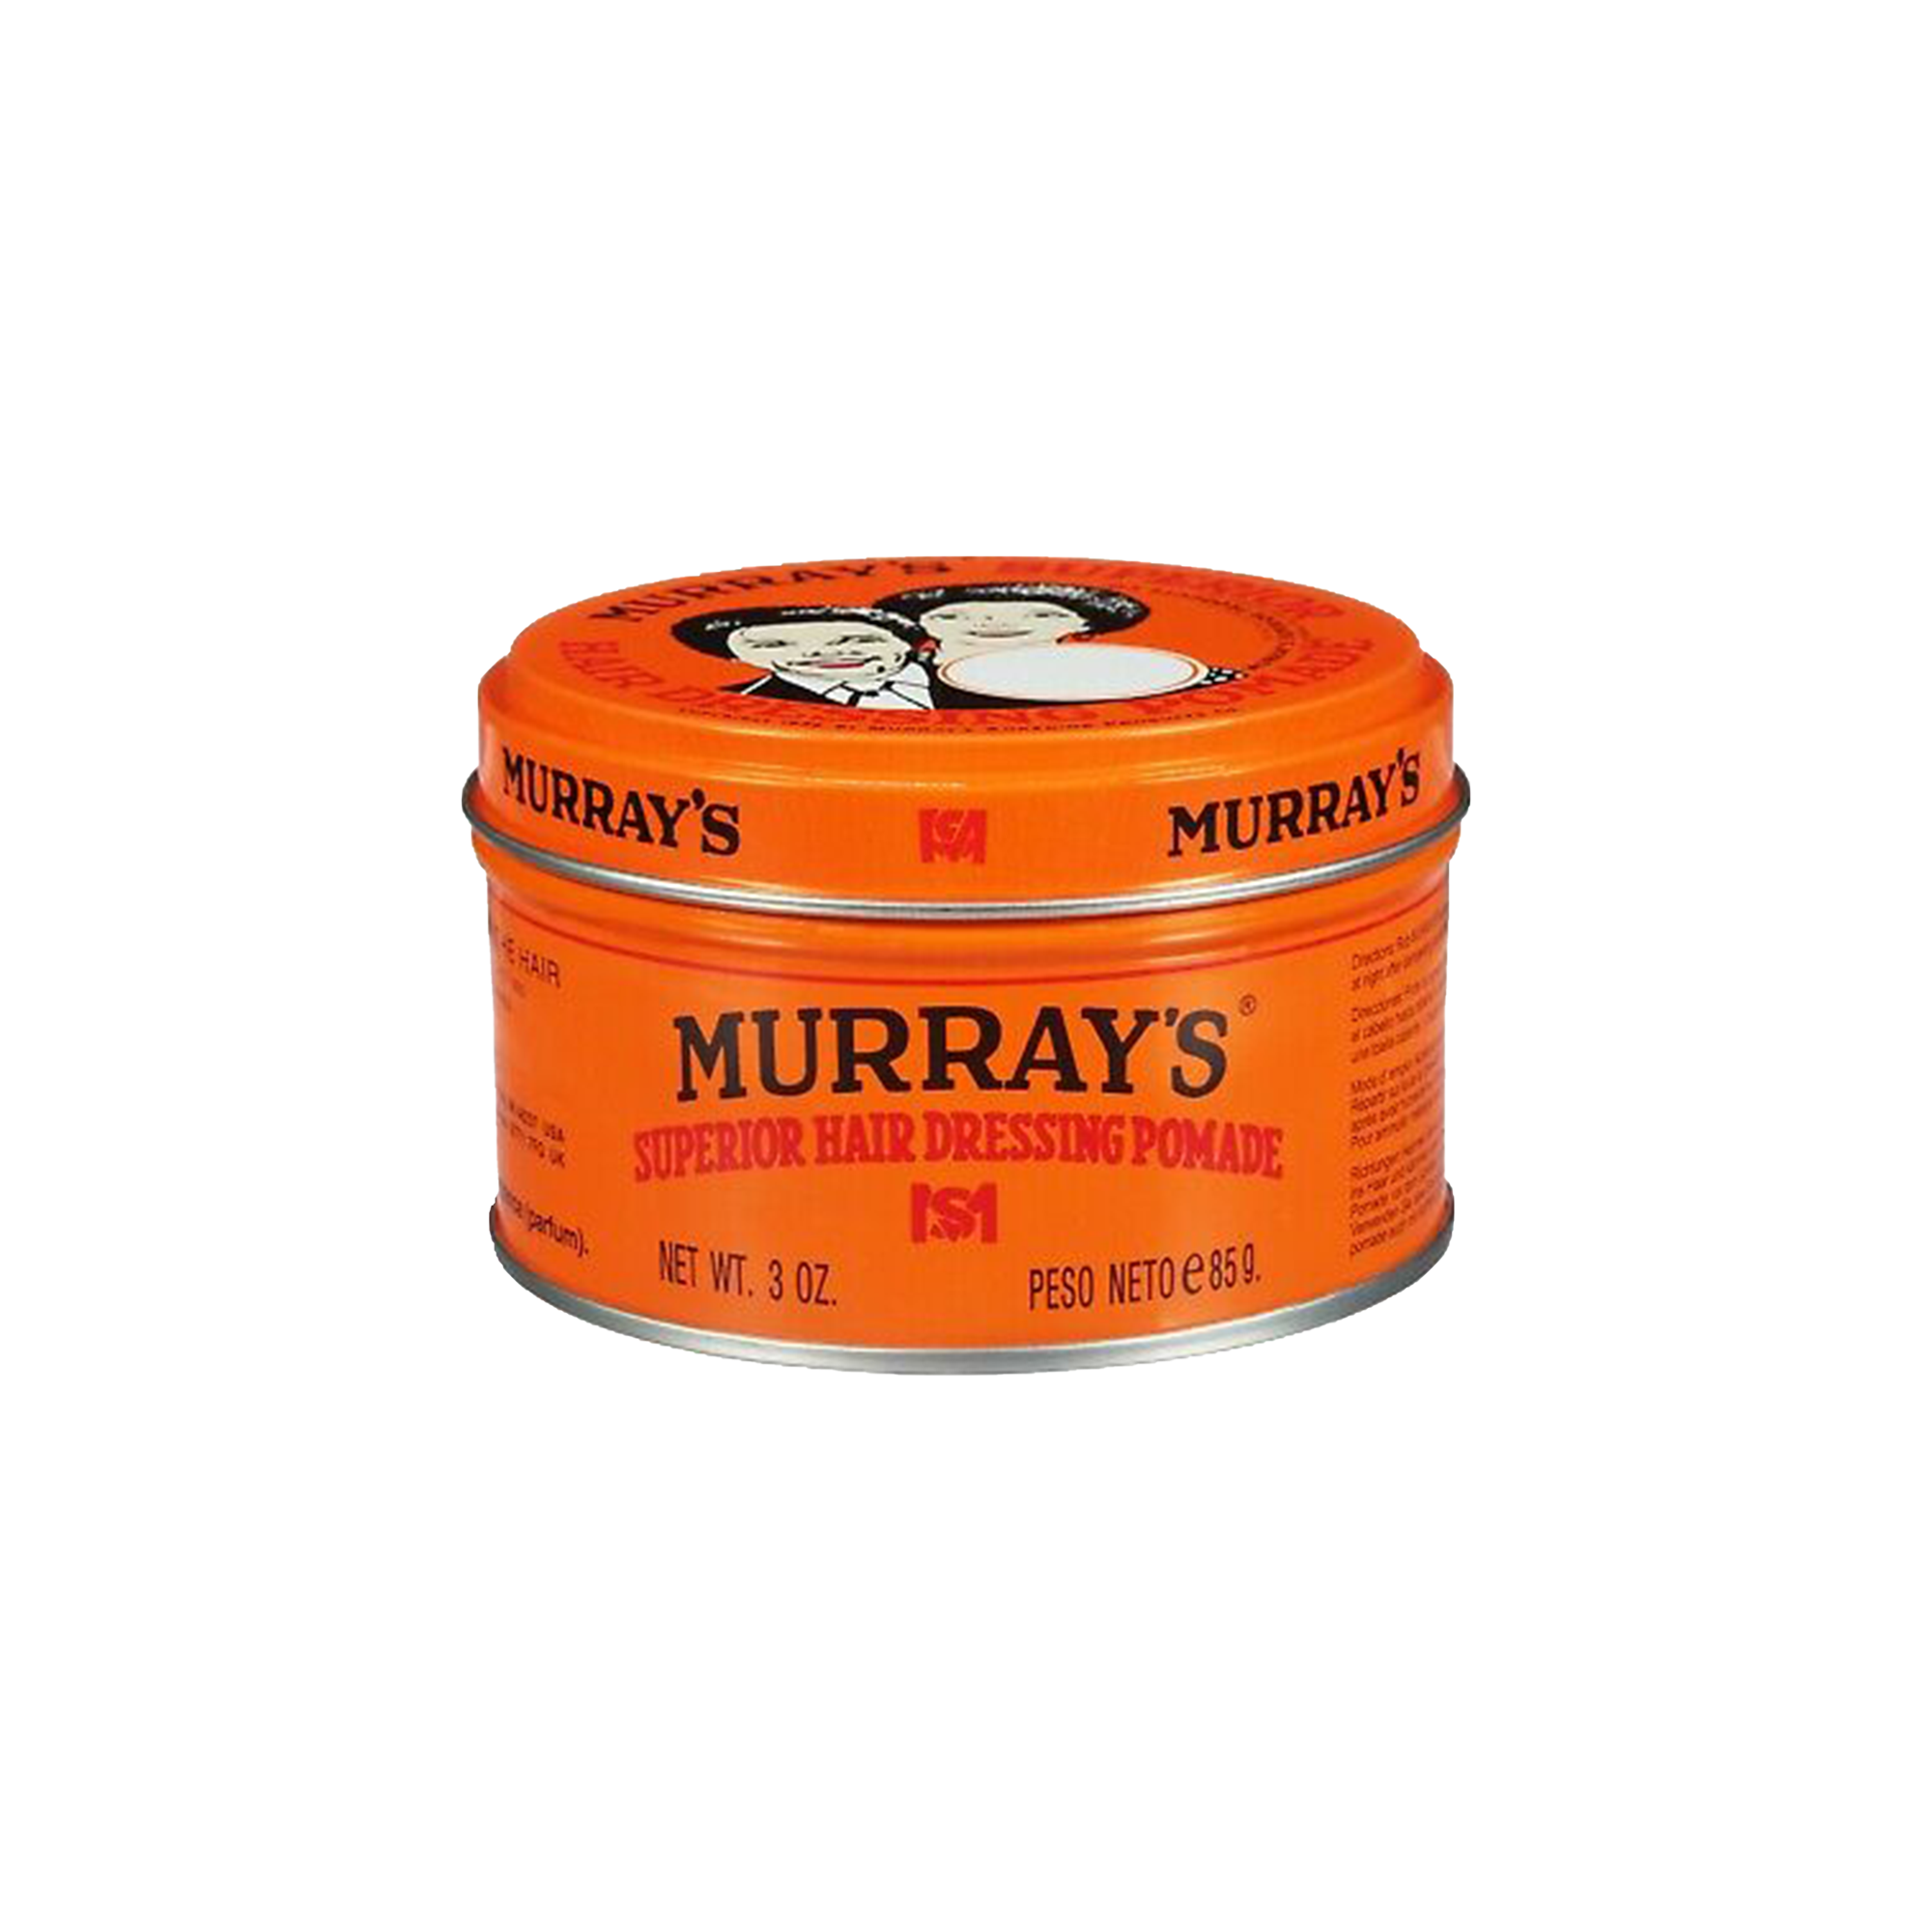 Murray's Superior Hair Dressing Pomade 3 oz. per Jar (2 Pack) : Beauty &  Personal Care 